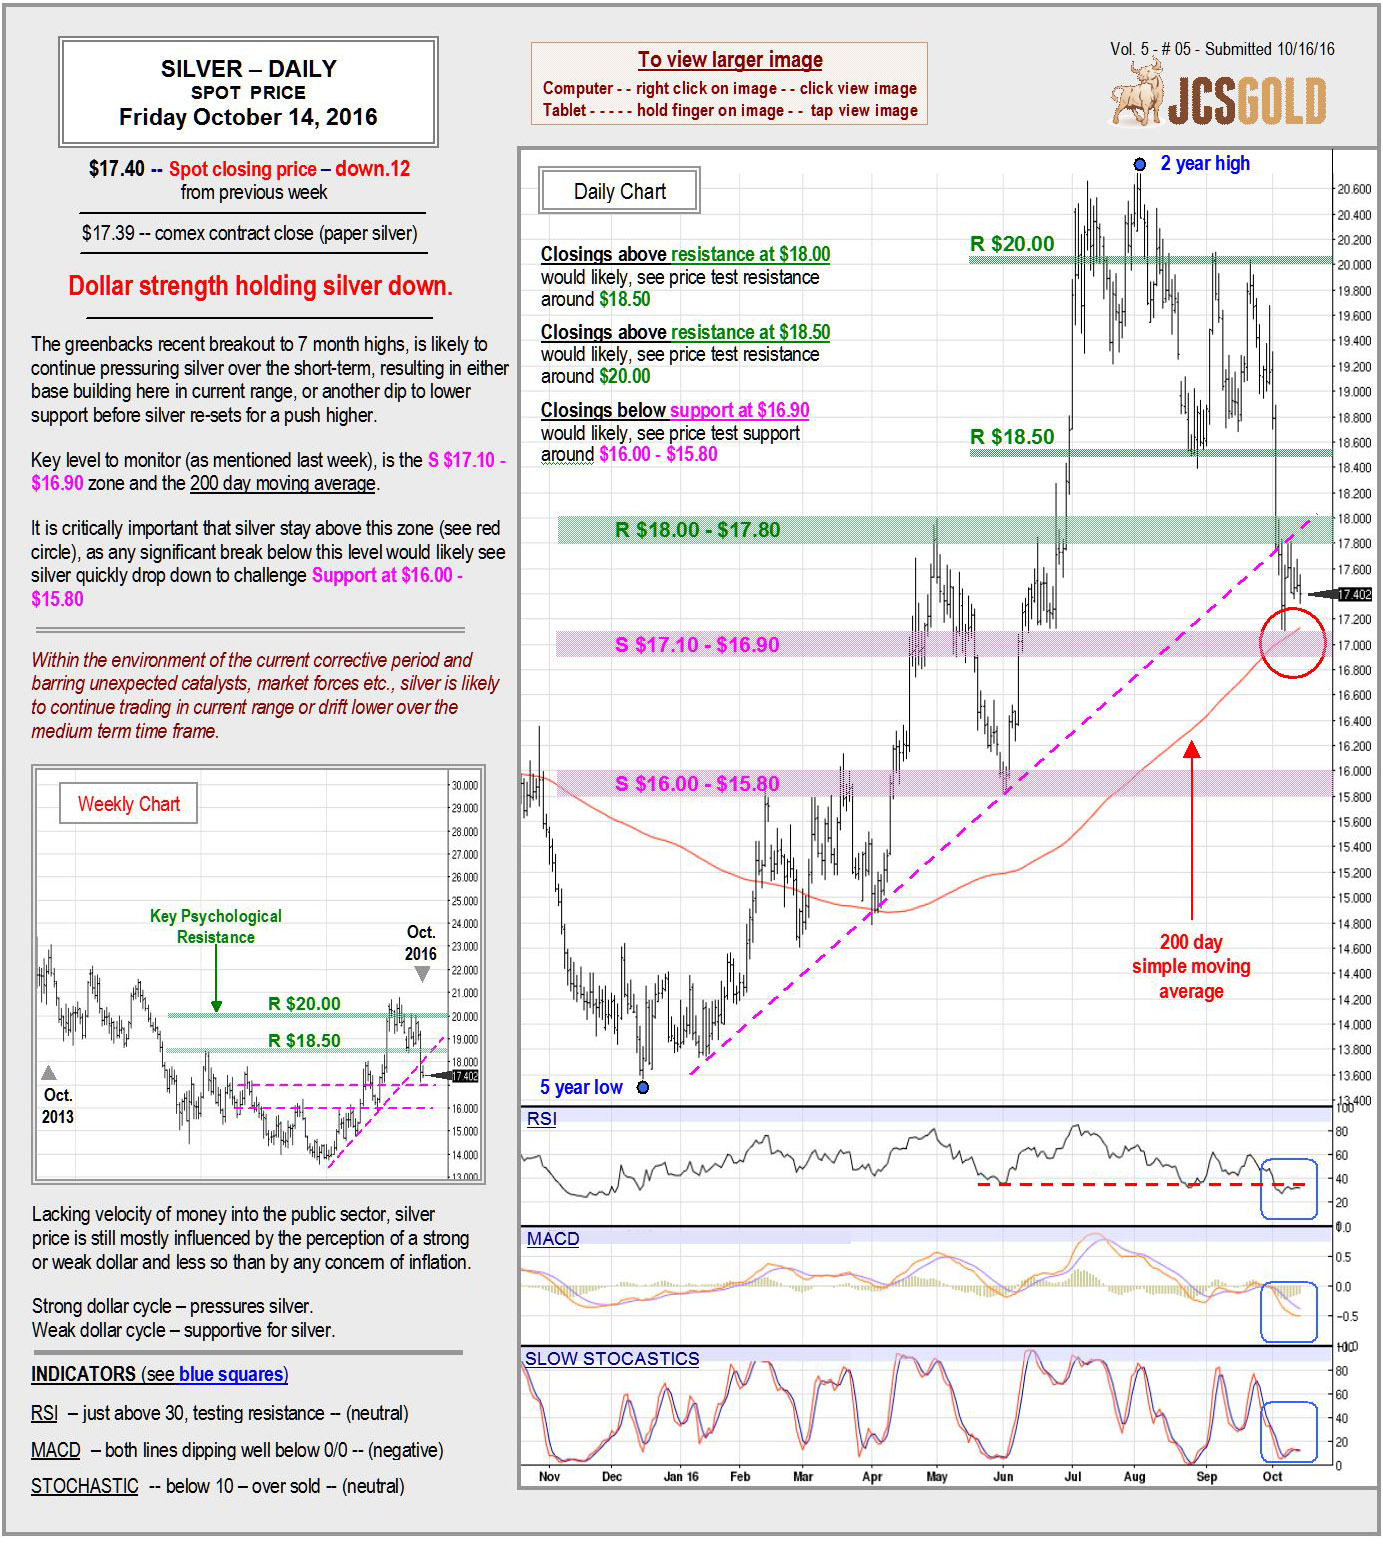 Oct 14, 2016 chart & commentary